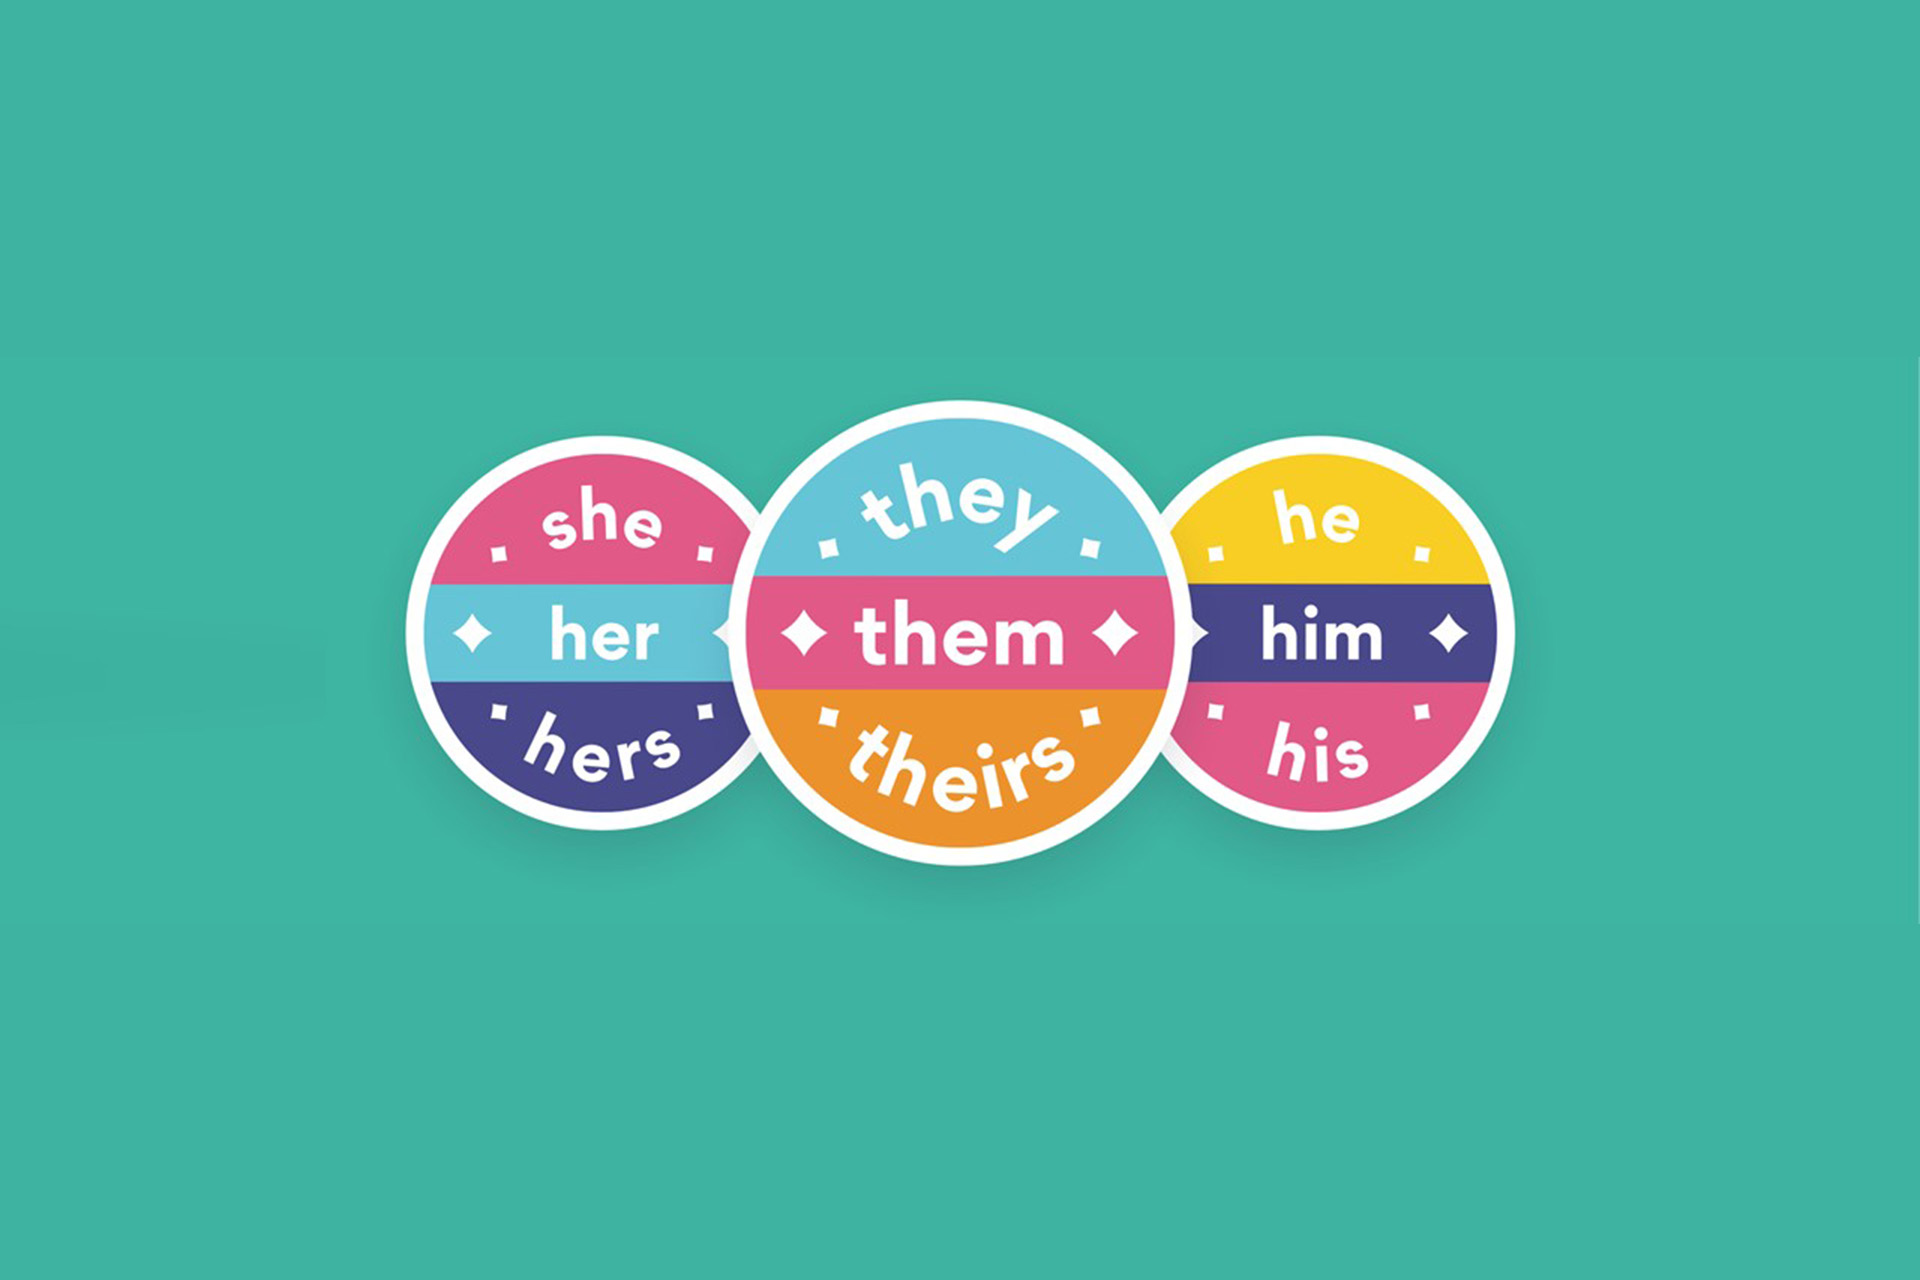 Pronouns, she, her, hers, they, them, theirs, he, him, his